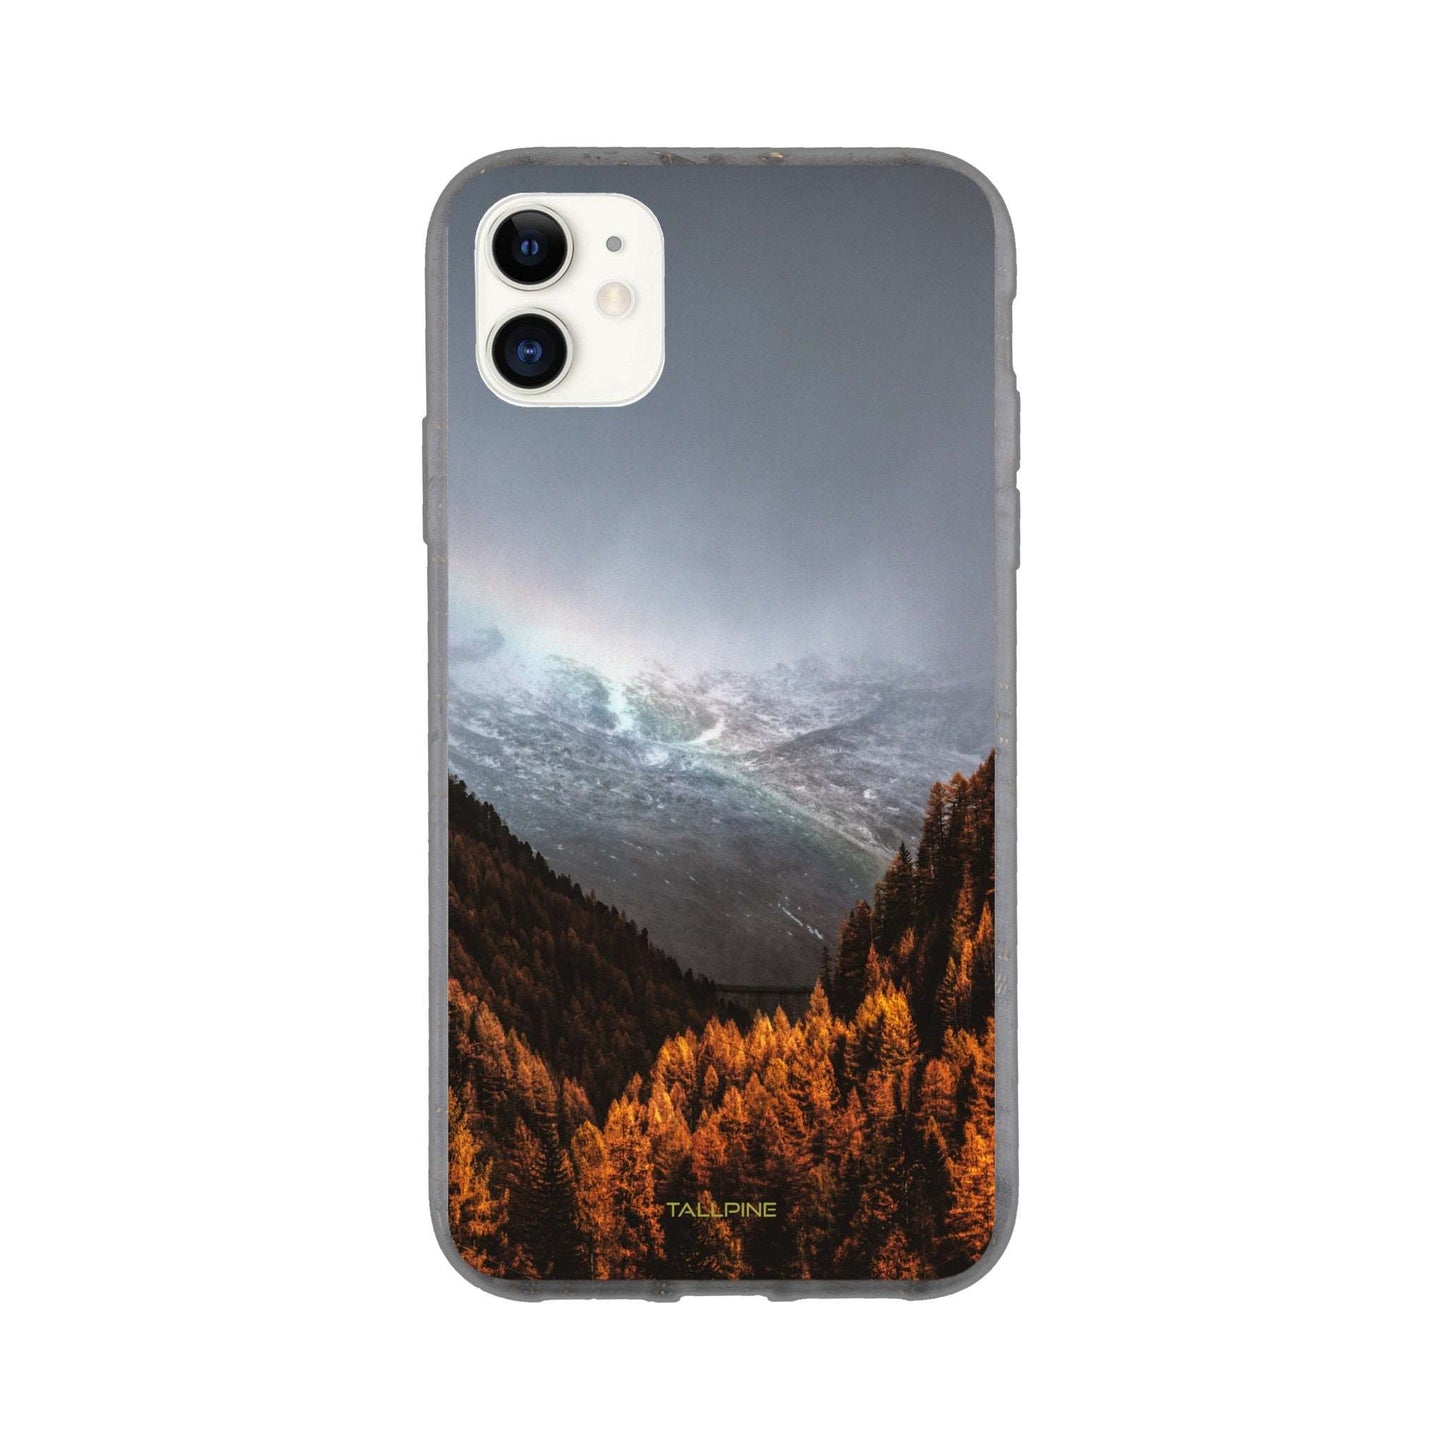 Autumn Mountain - Eco Case iPhone 11 - Tallpine Cases | Sustainable and Eco-Friendly Phone Cases - Autumn Mountain Nature